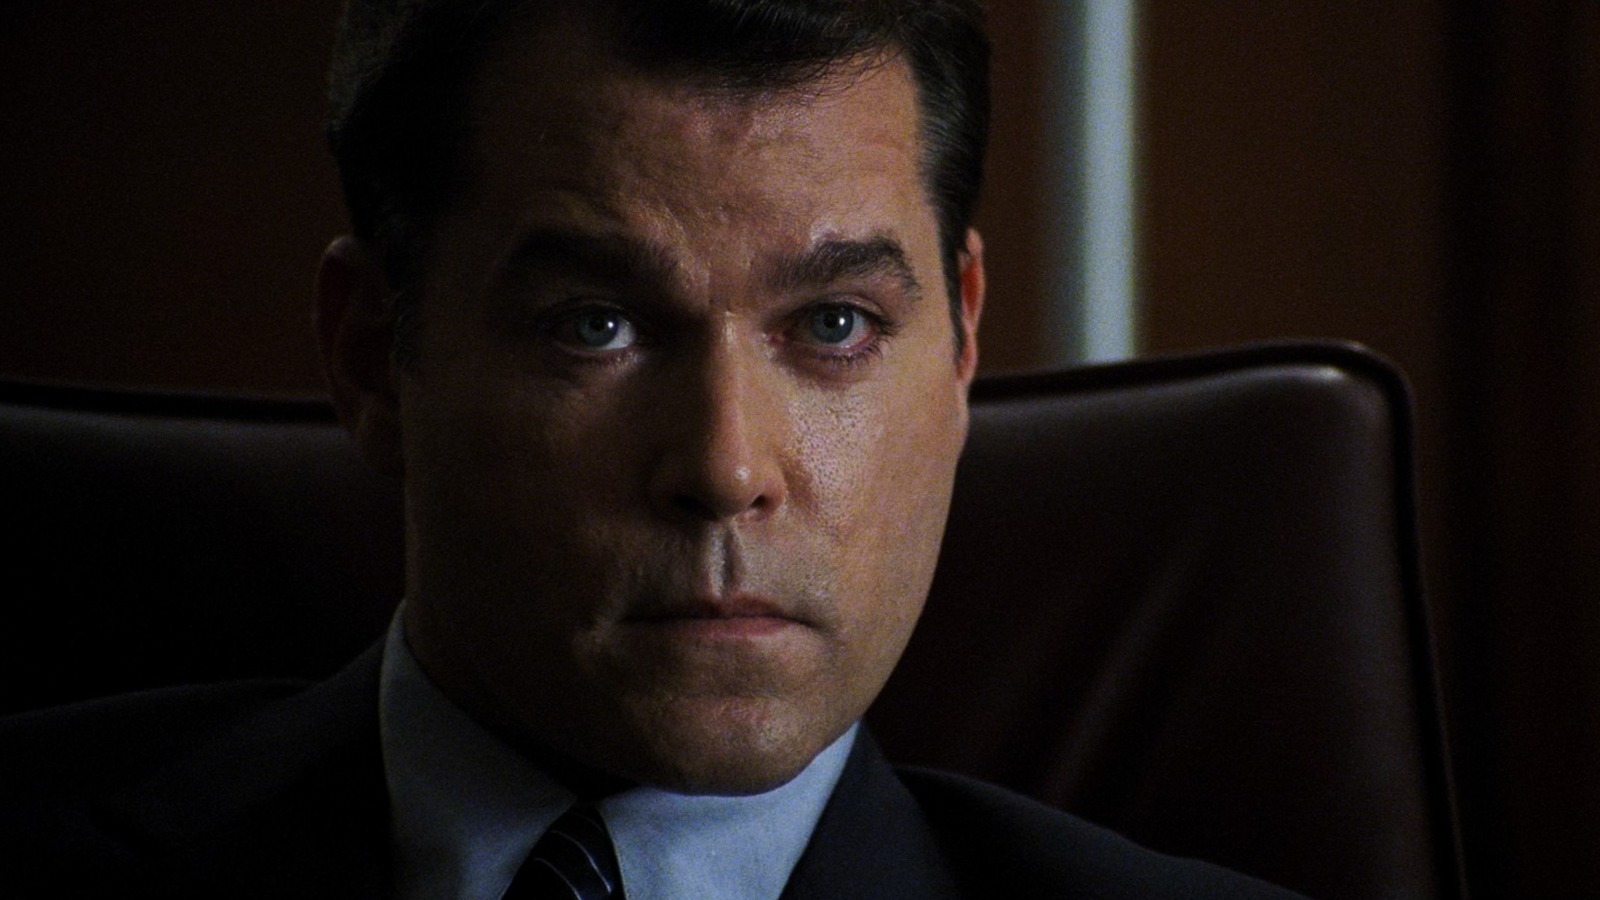 The Disturbing Ray Liotta Scene We'll Never Get Out Of Our Brains